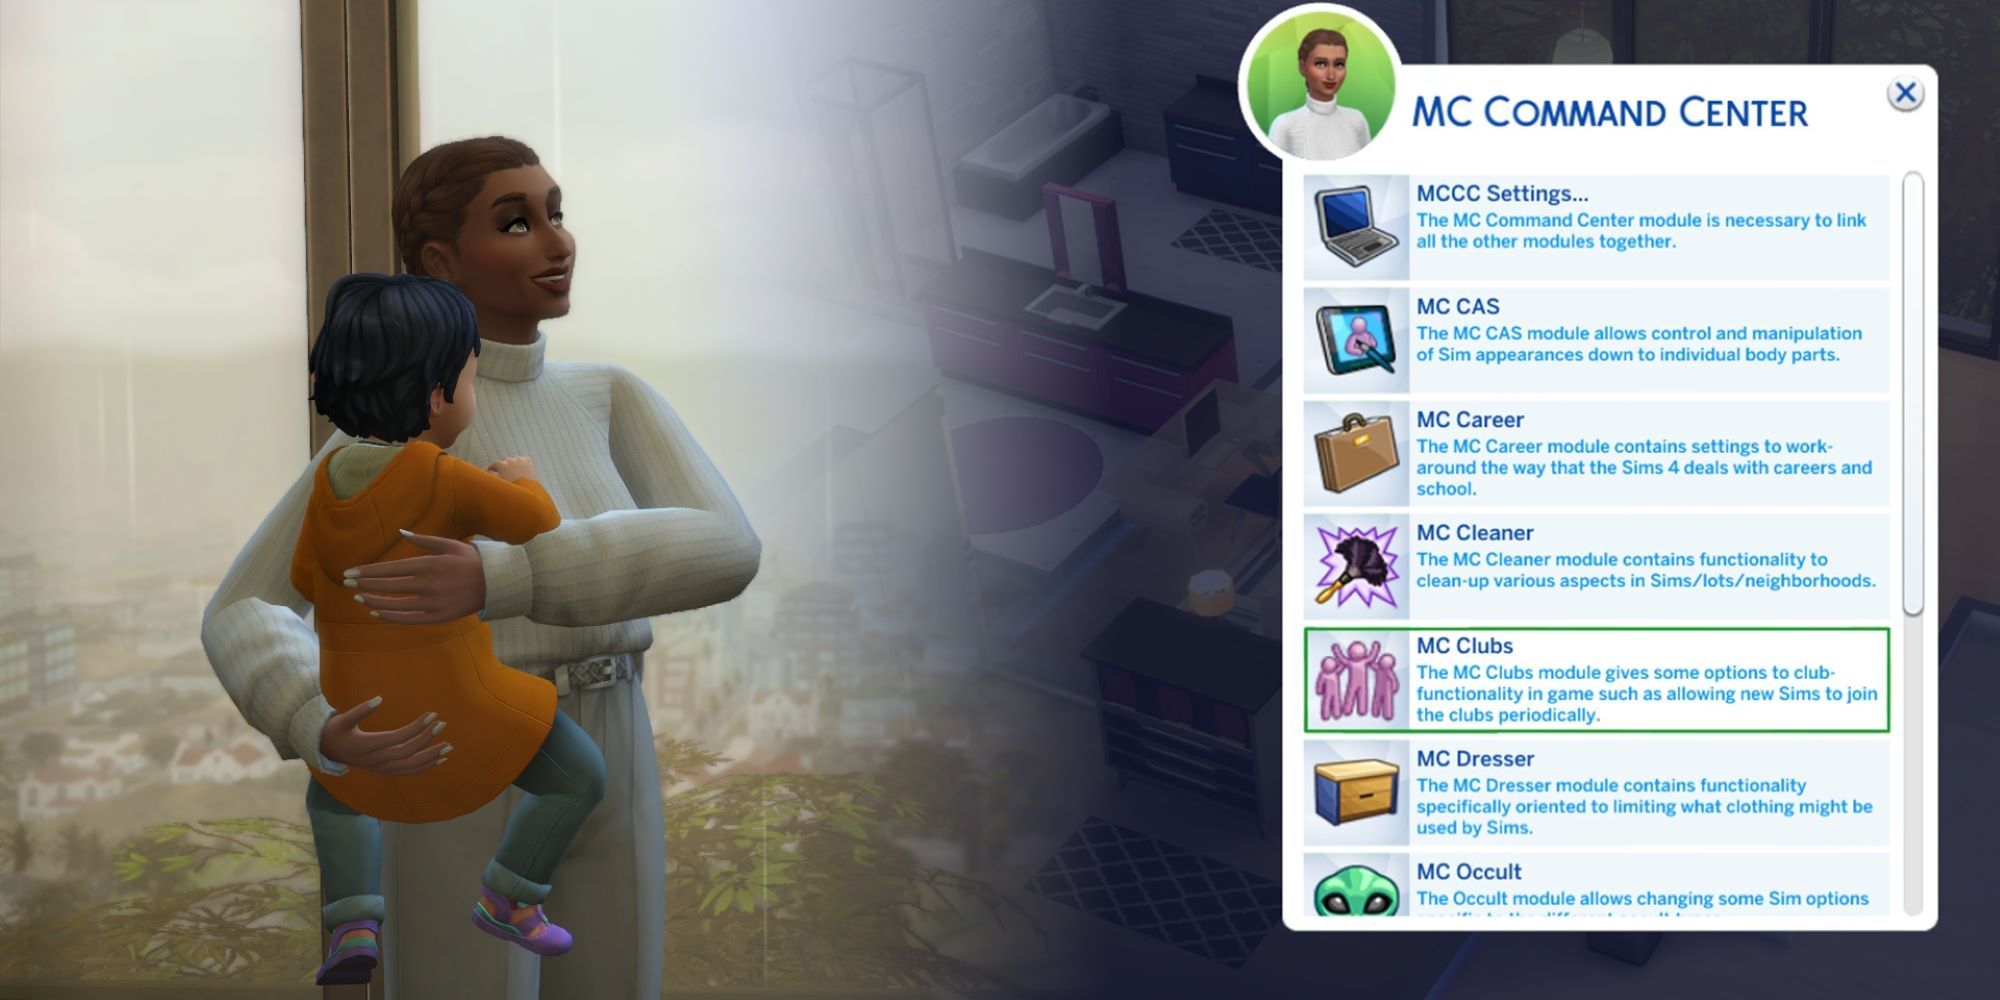 The Sims 4: How To Get MC Command Center Mod